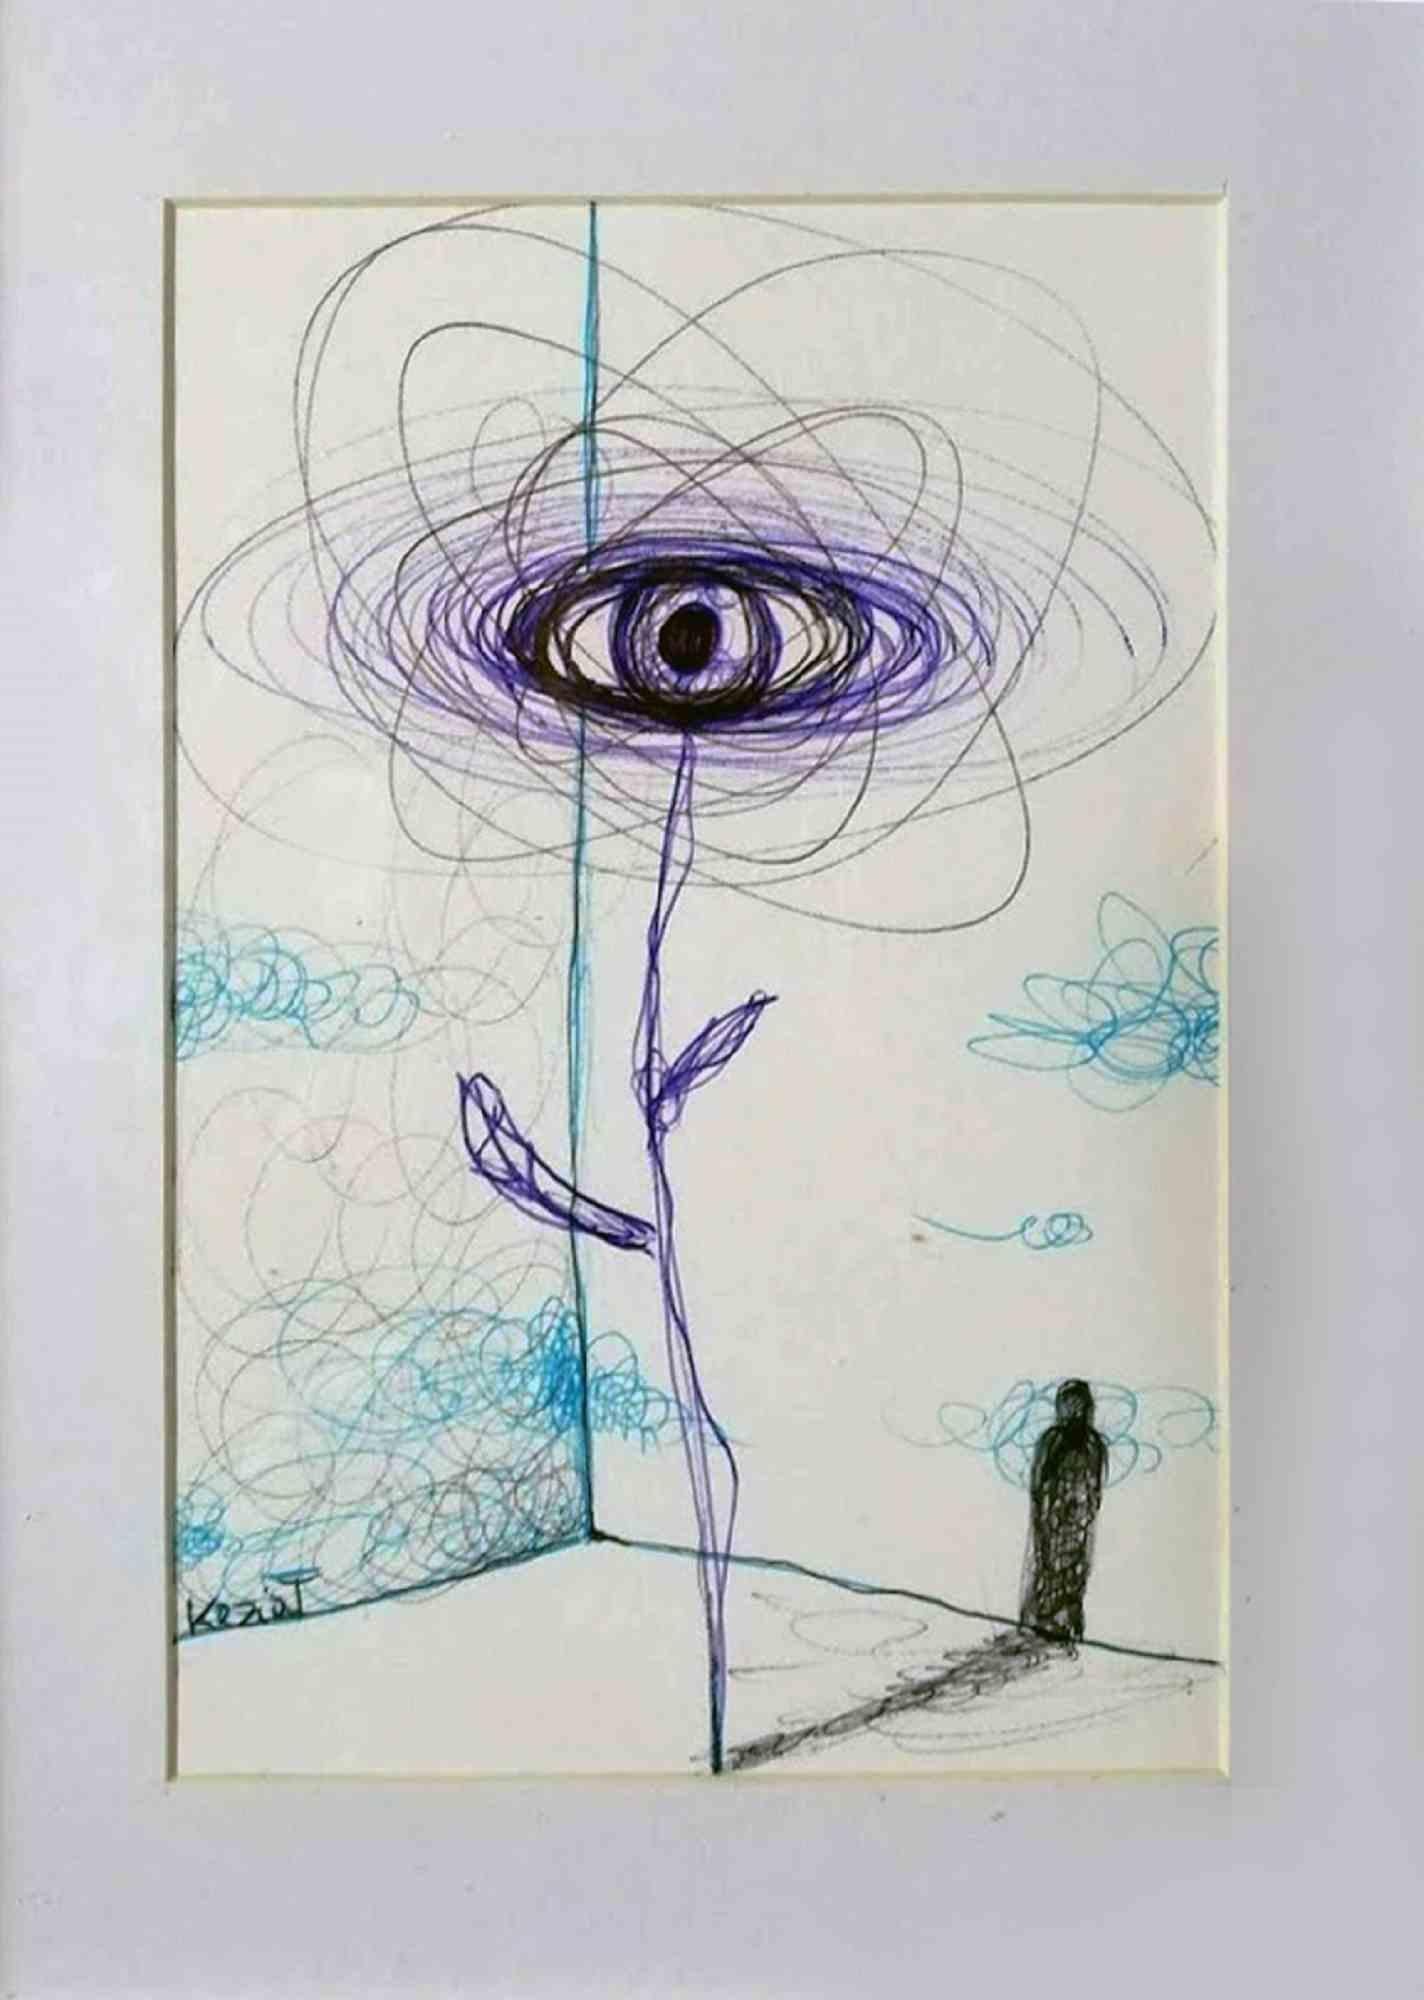 Beyond  is a beautiful drawing realized by the Italian artist KEZIAT  in 2022.

Pen on 10x 15 cm paper, on 10 x 22 cm support.

Hand-signed by the artist .

Perfect conditions. Certificate of authenticity provided by the artist.